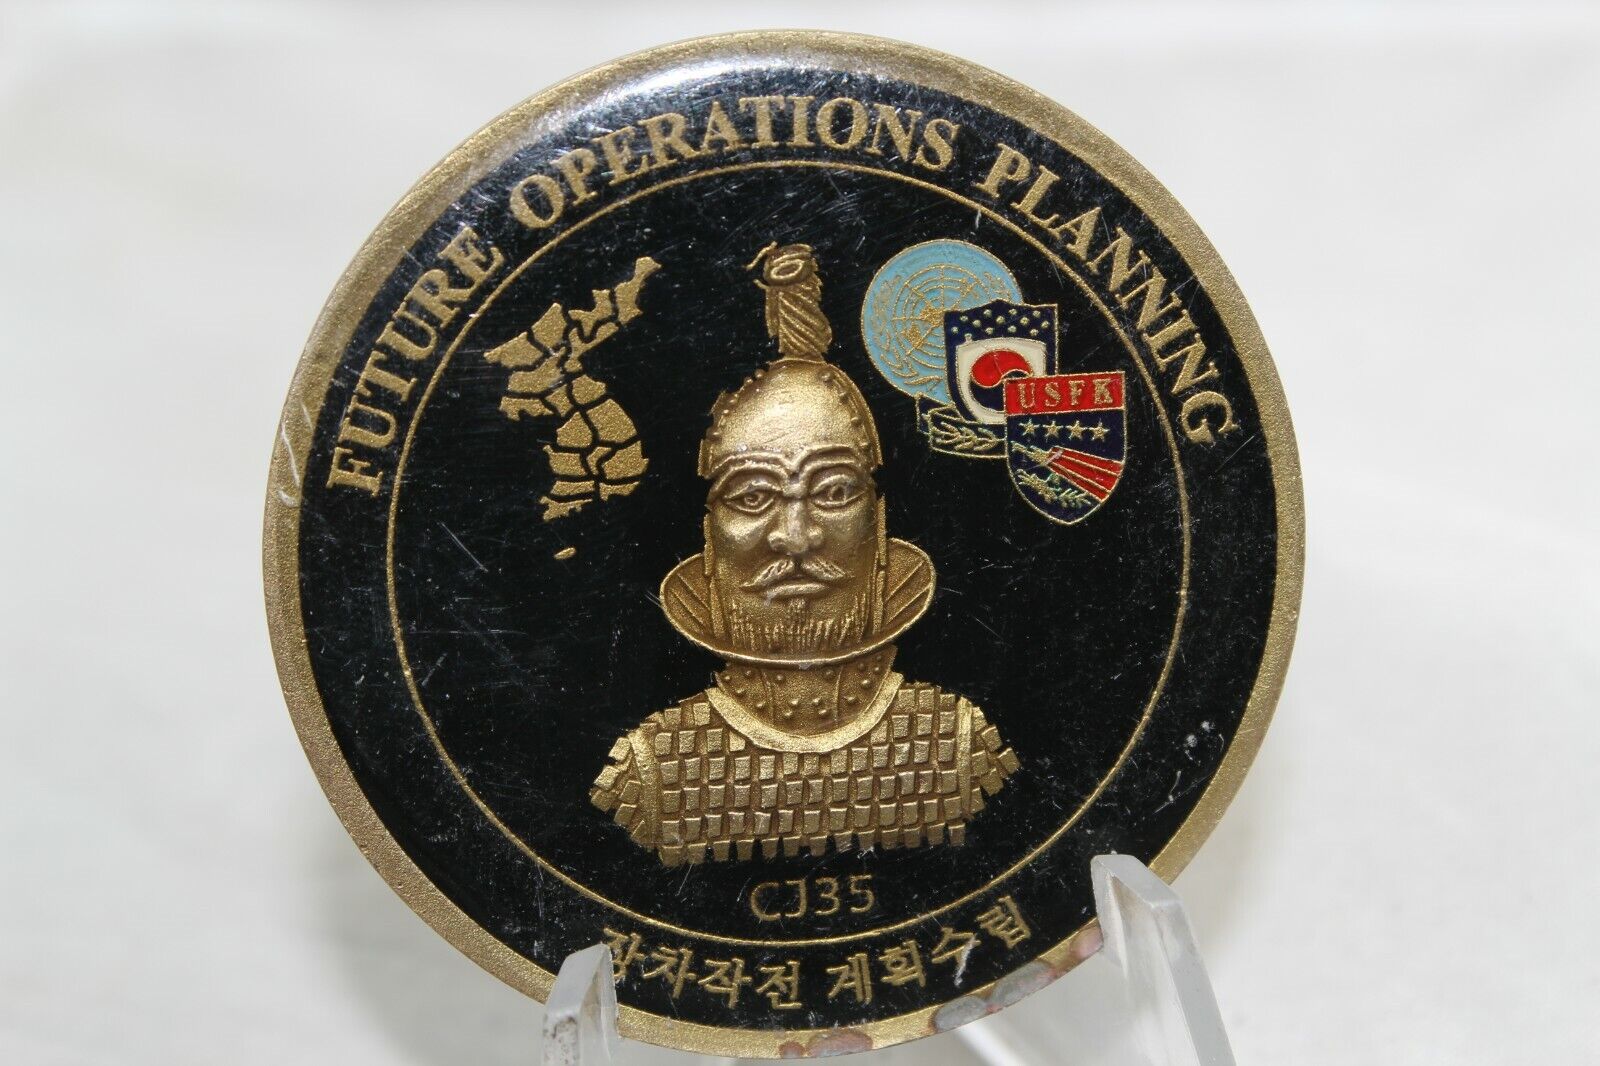 UNC CFC USFK CJ35 Future Operations Planning Challenge Coin